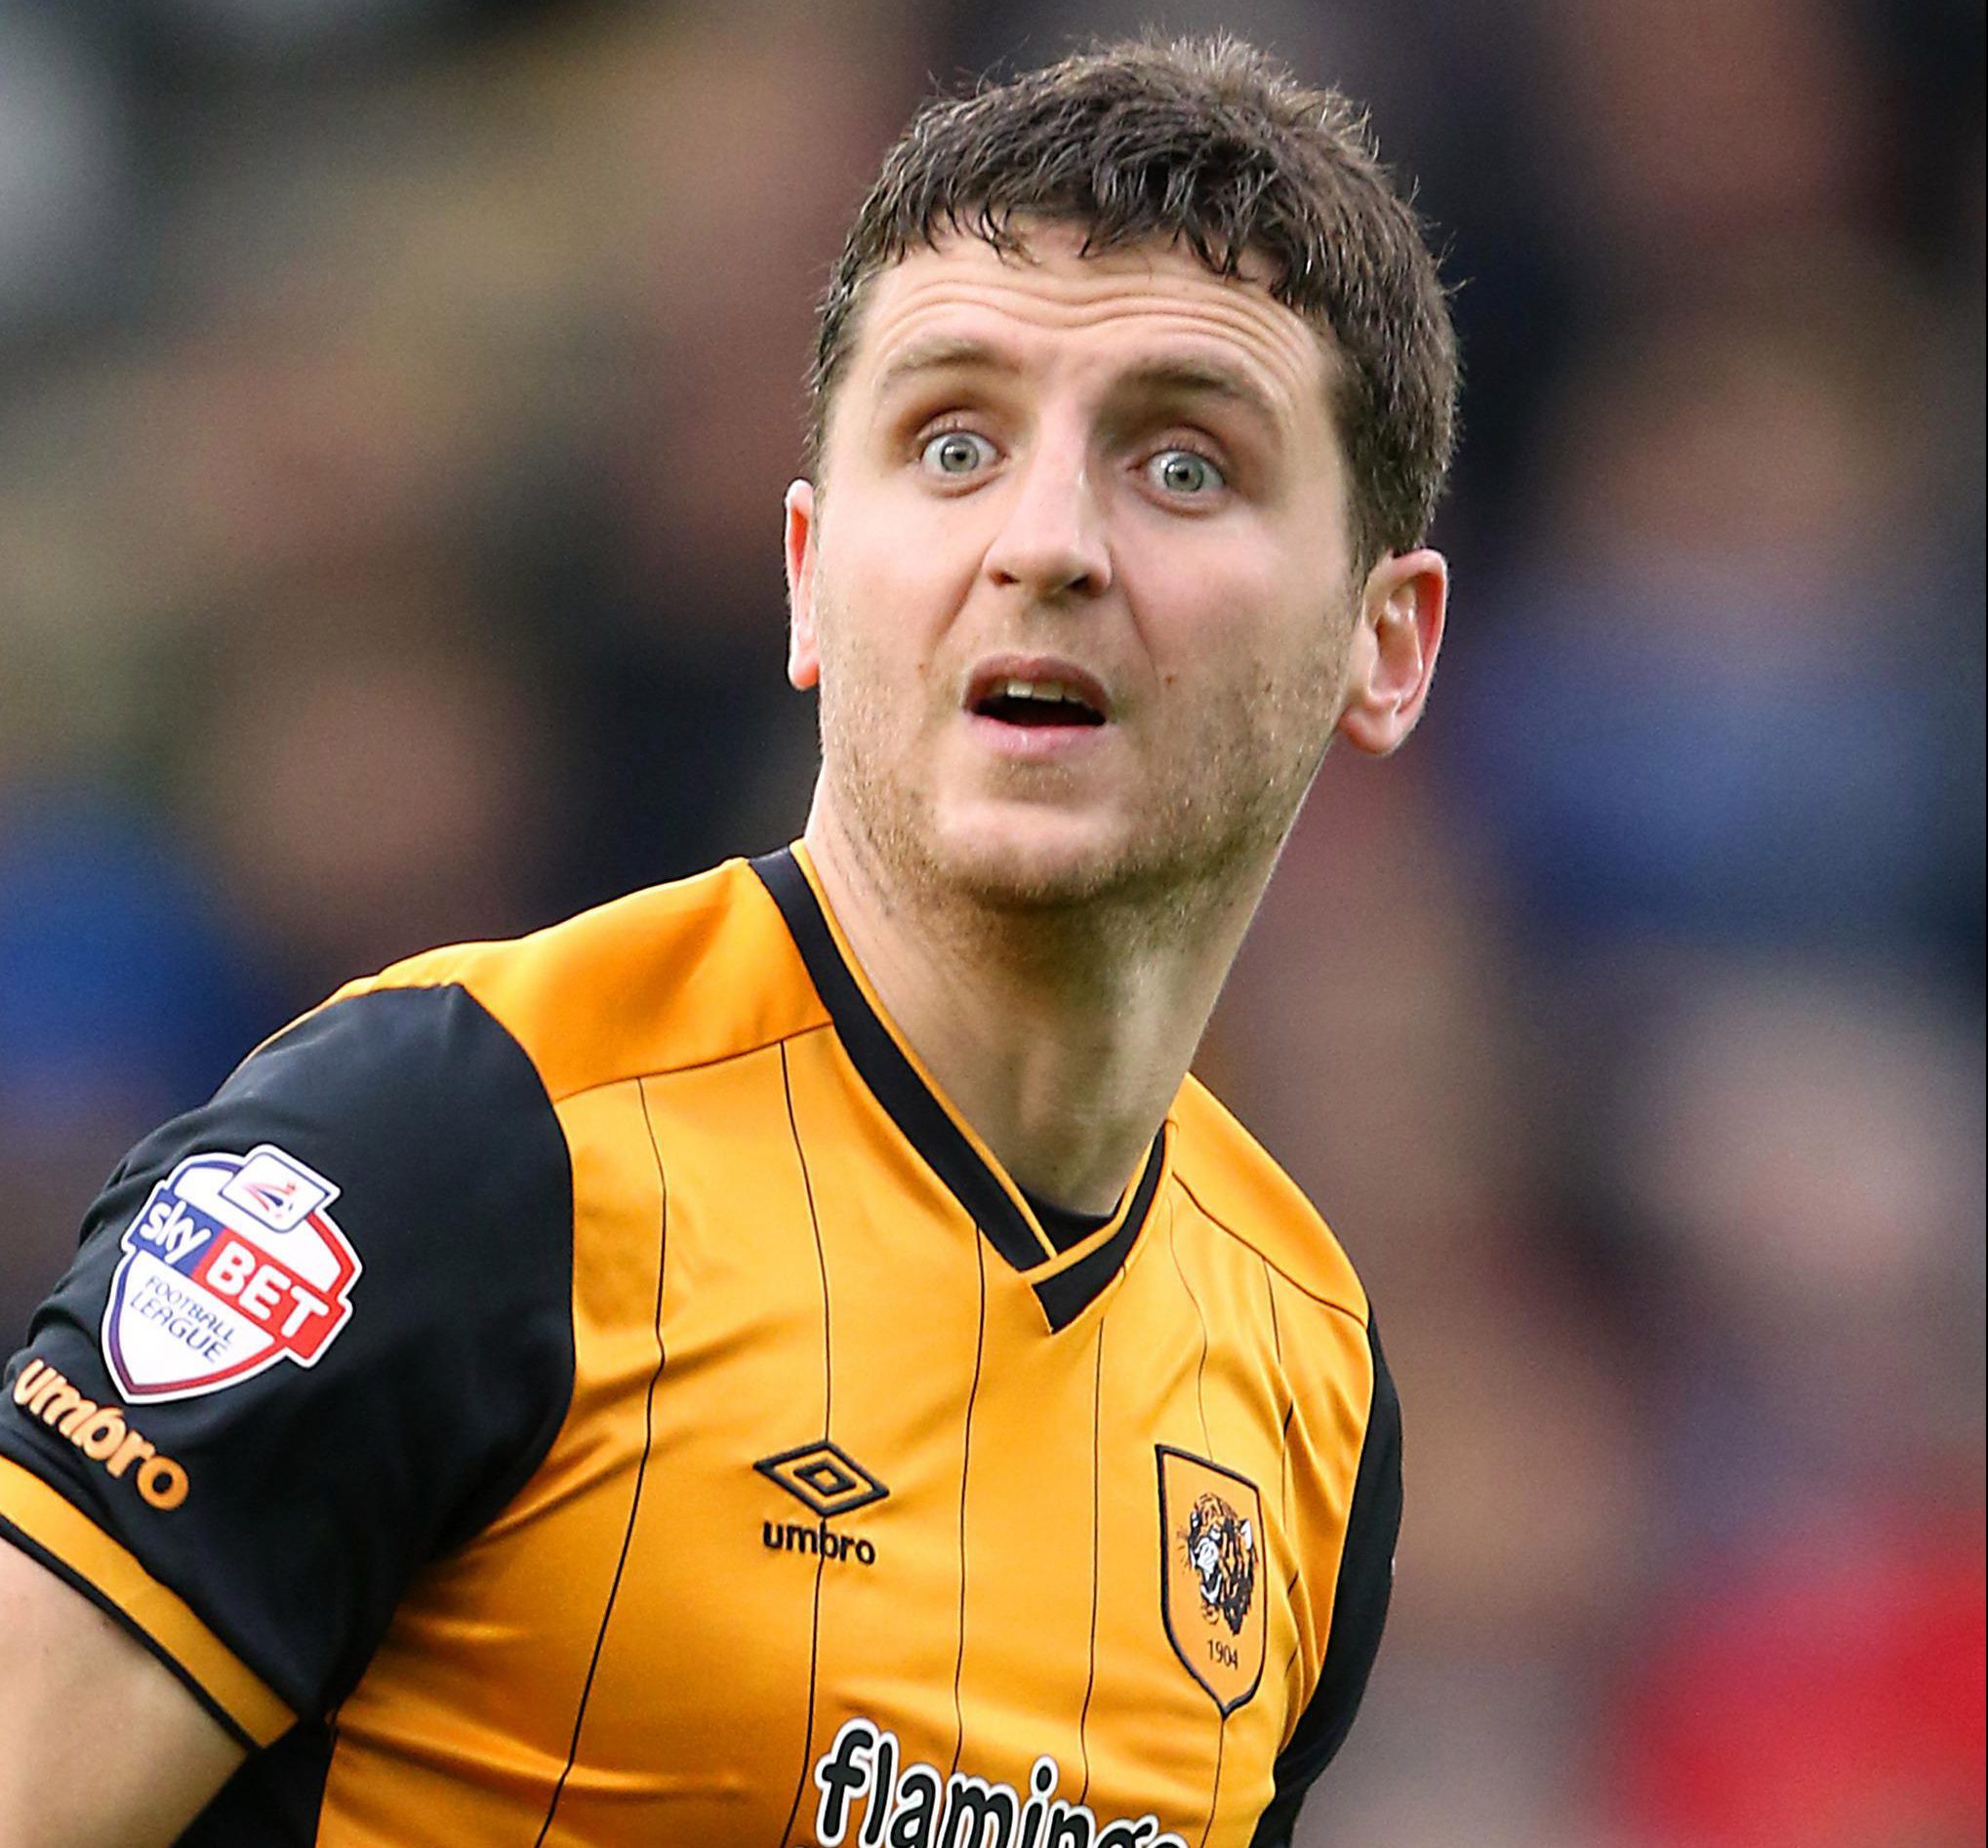 Hull defender Alex Bruce discovers his contract will not be renewed via TWEET – and issues hilarious reply | The Sun